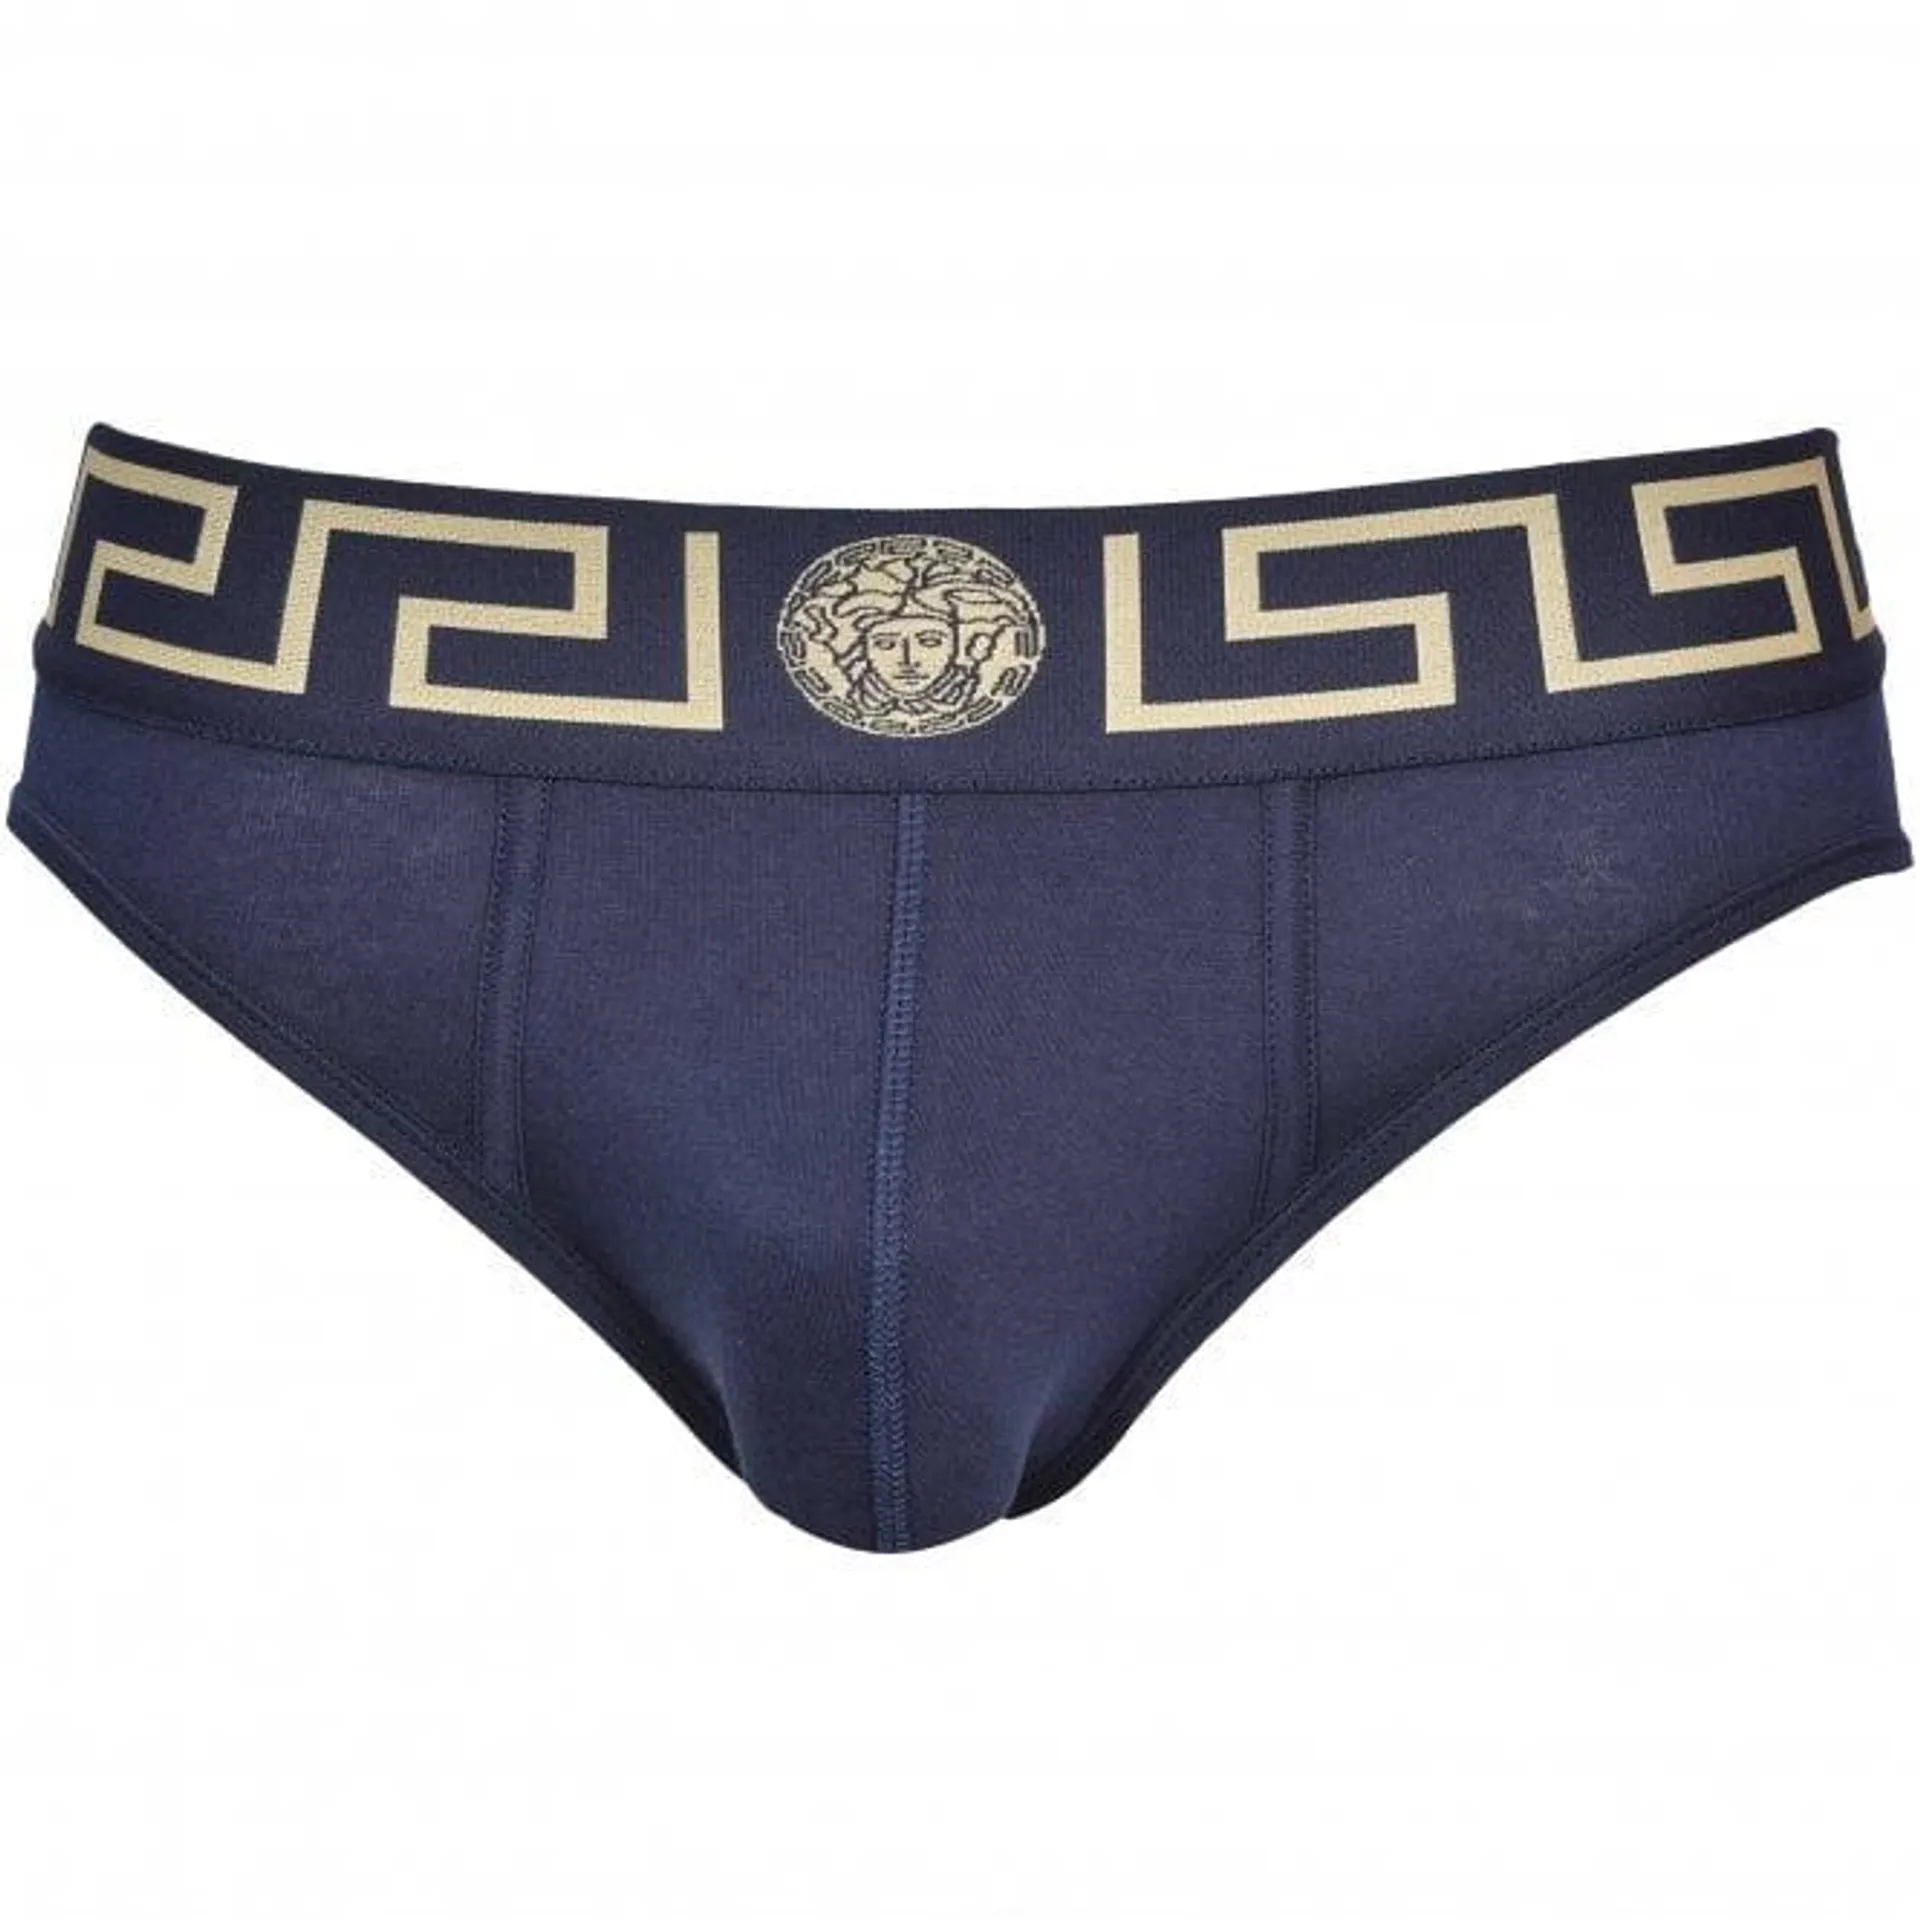 Iconic Low-Rise Brief, Blue/gold